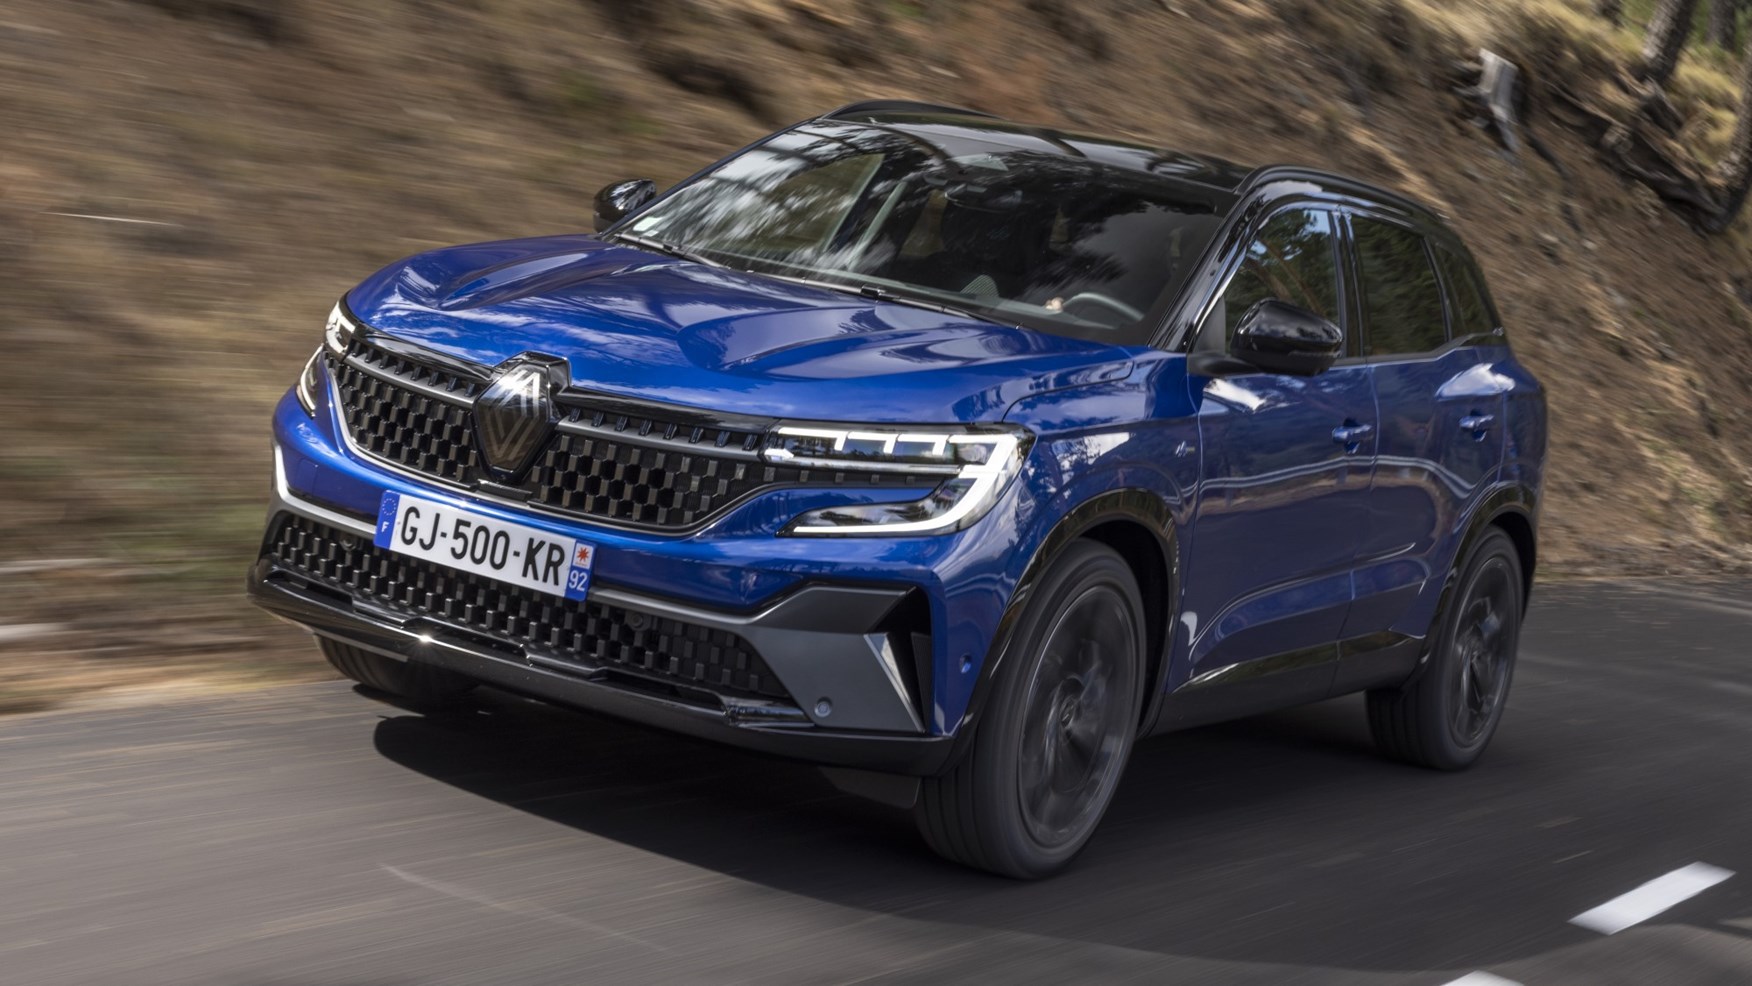 First Details Announced for Renault Austral SUV